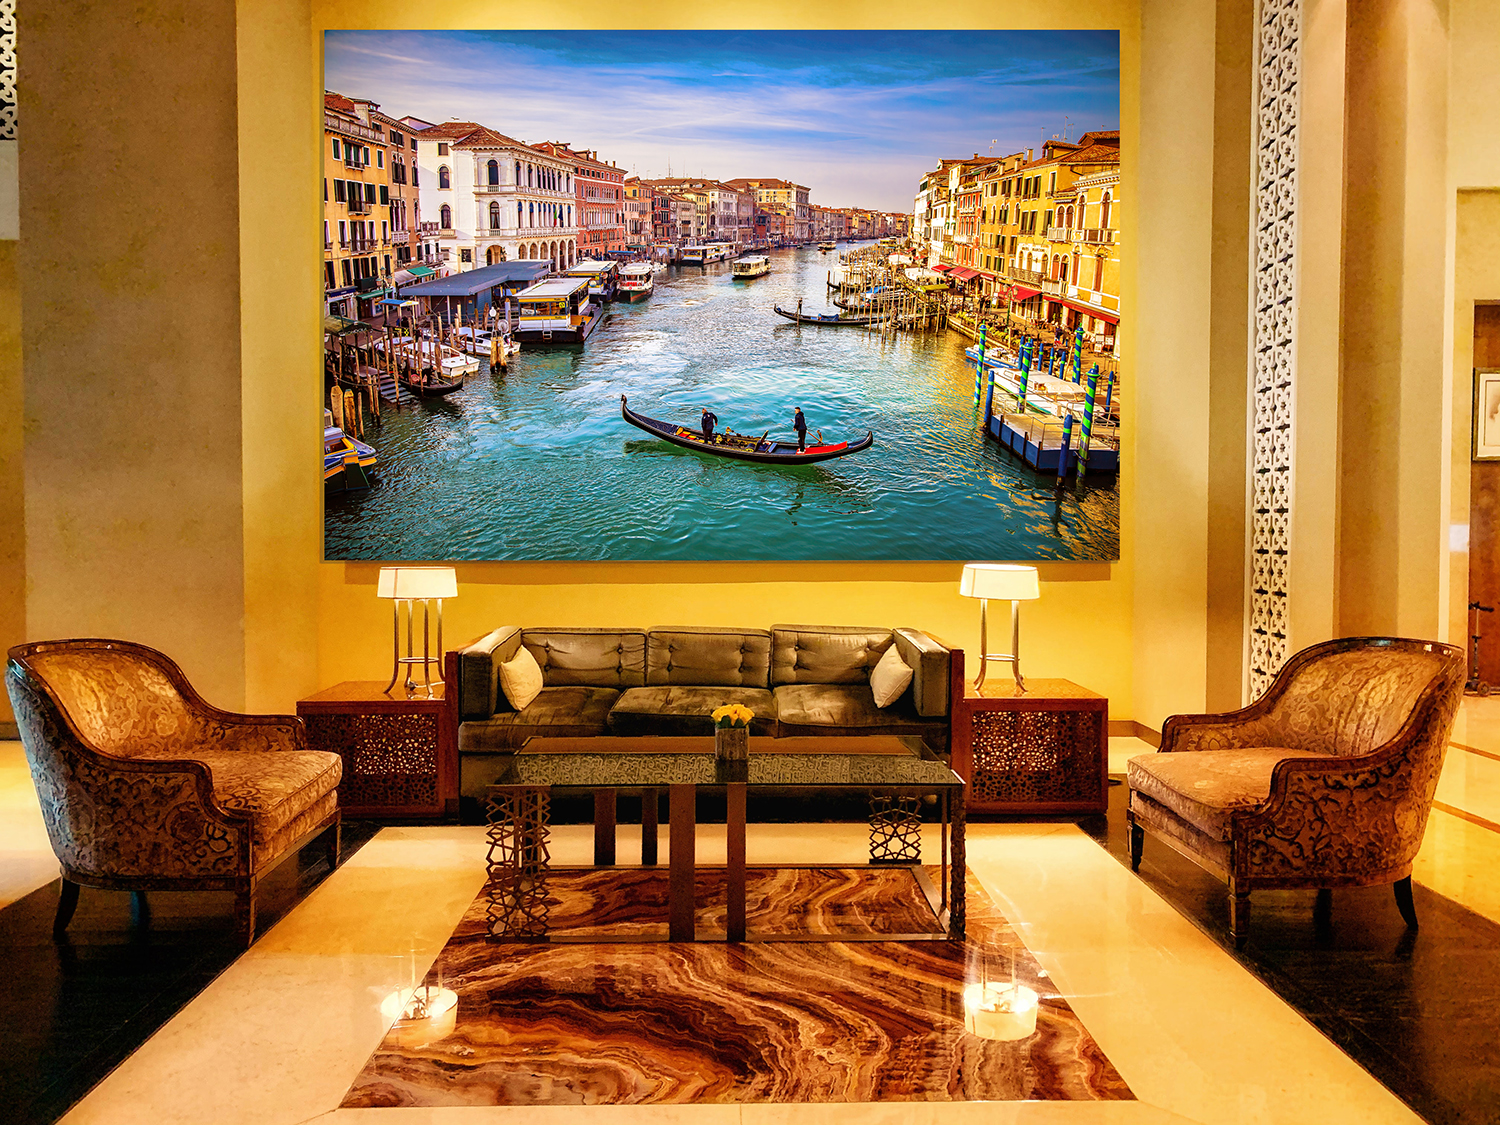 VENICE GRAND CANAL ROOM